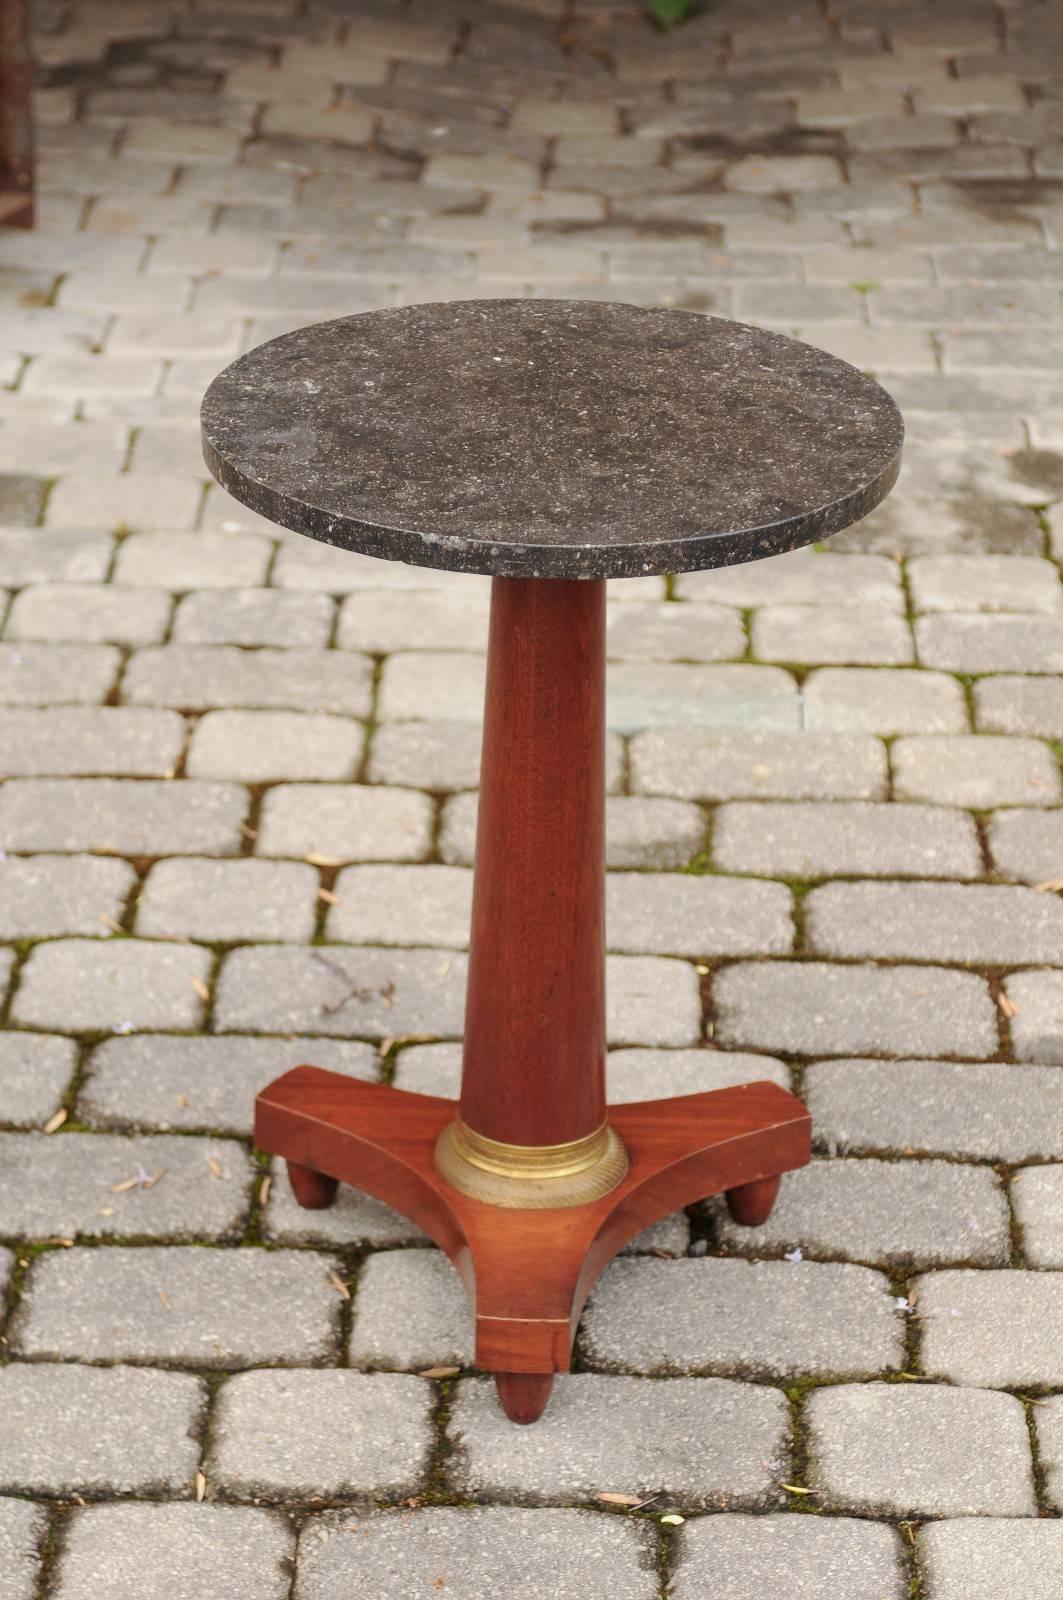 A French Empire style walnut gueridon table with grey flecked marble top and pedestal base with bronze mount from the second half of the 19th century. This French Empire style table features a circular dark grey flecked marble top, raised on a